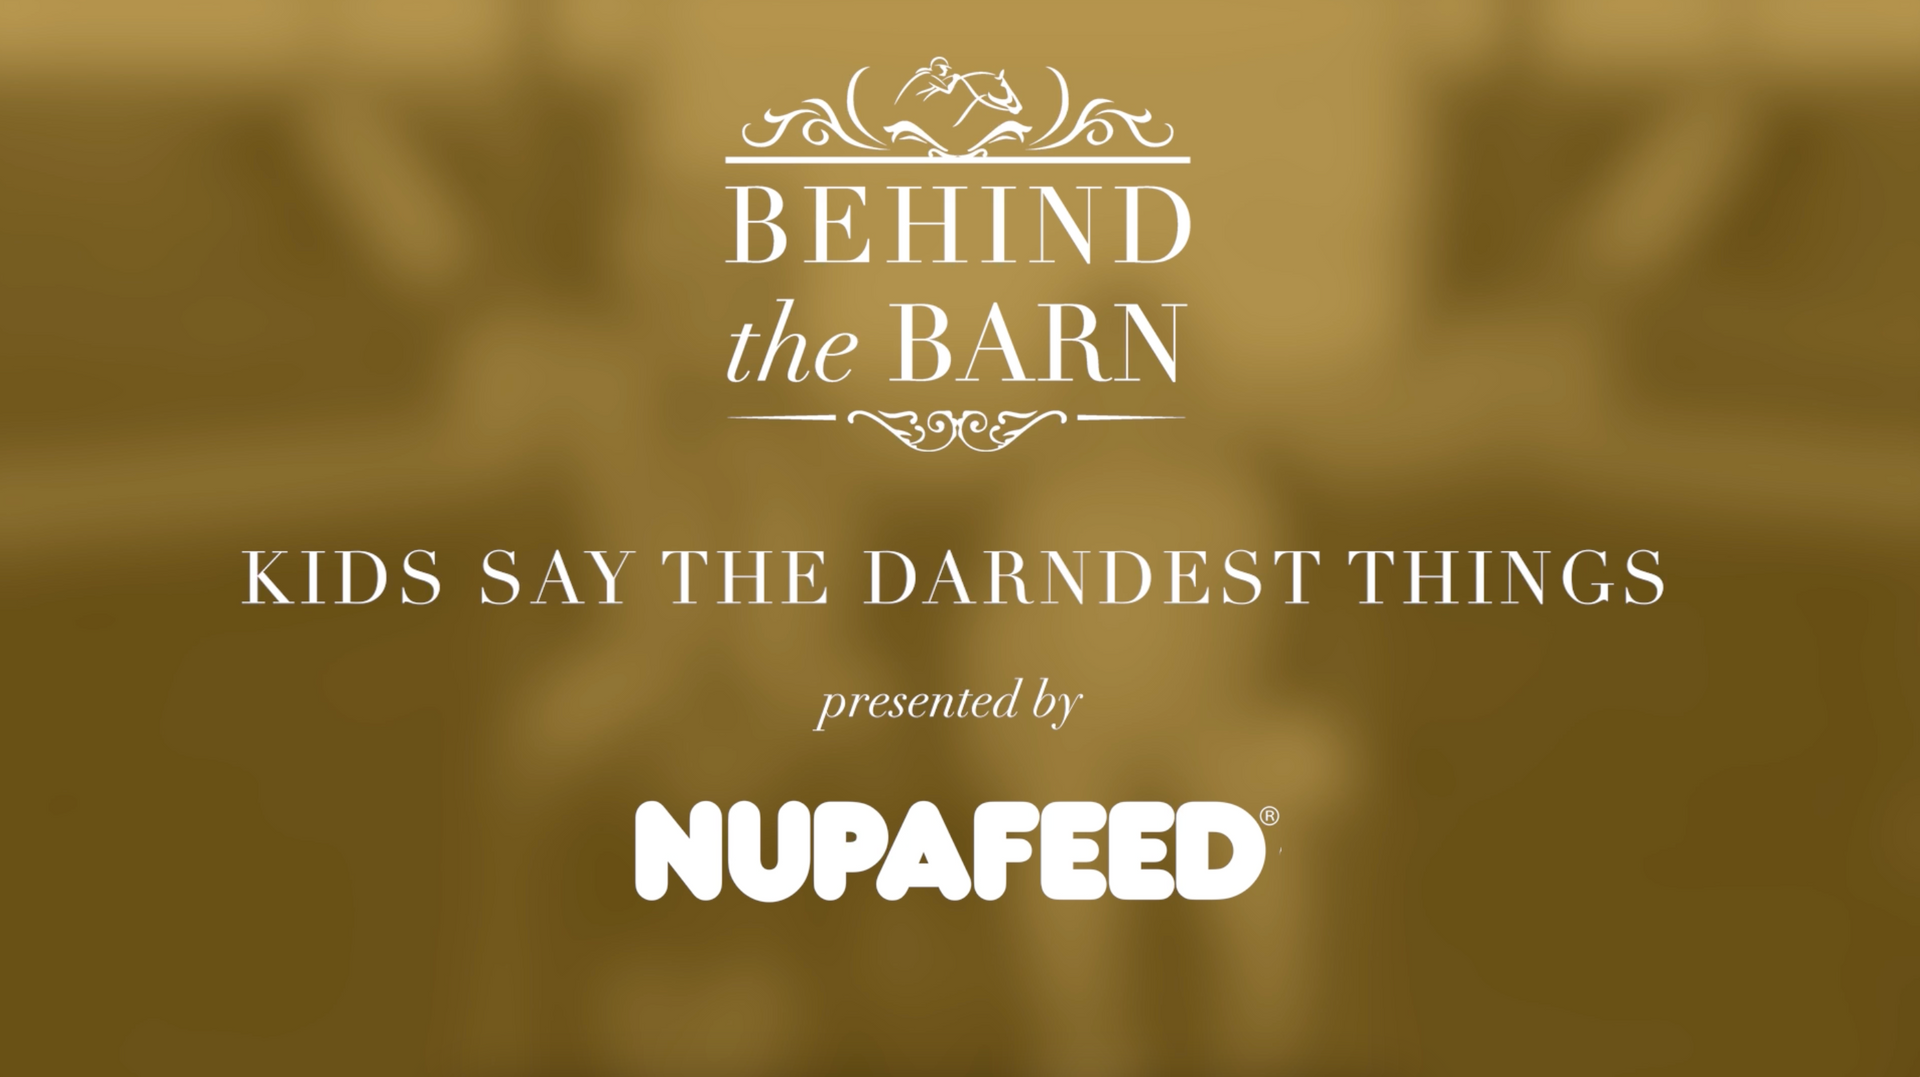 Behind the barn kids say the darndest things presented by nupafeed